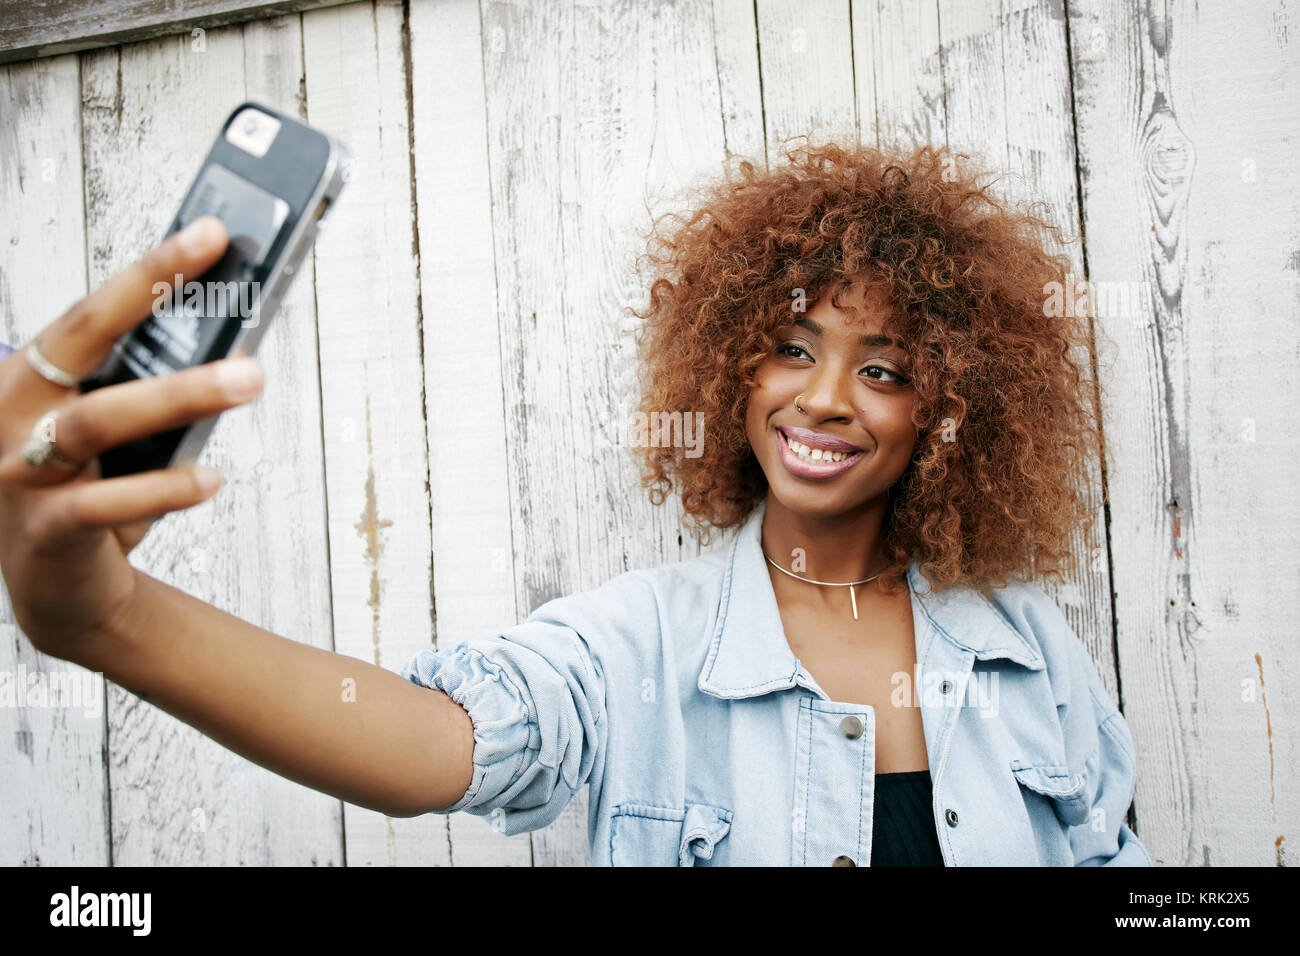 Black woman posing for cell phone selfie Stock Photo